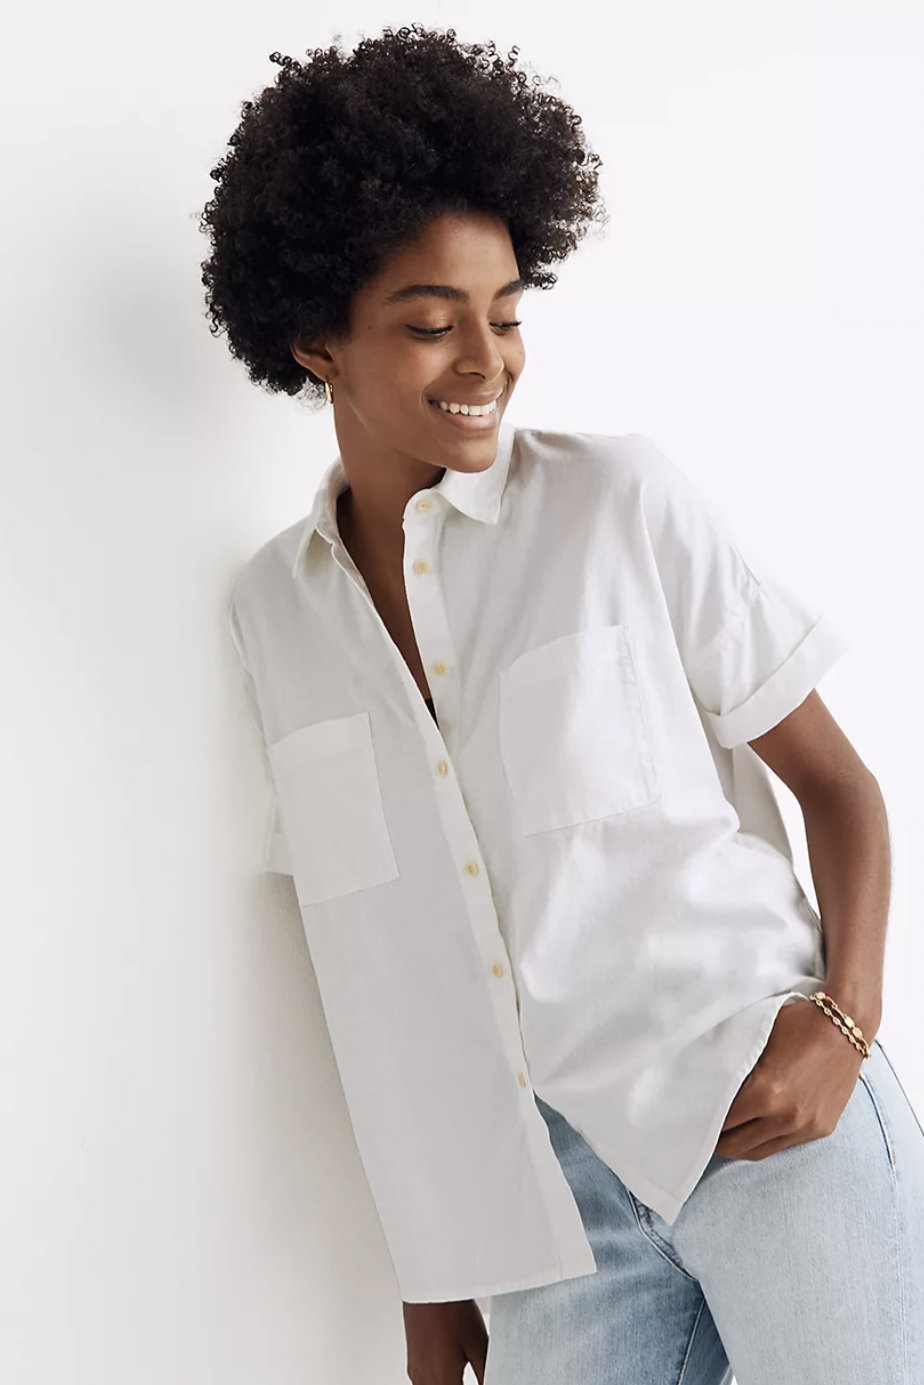 Best White Button-Down Shirts for Women in 2023 - Chic Shirts